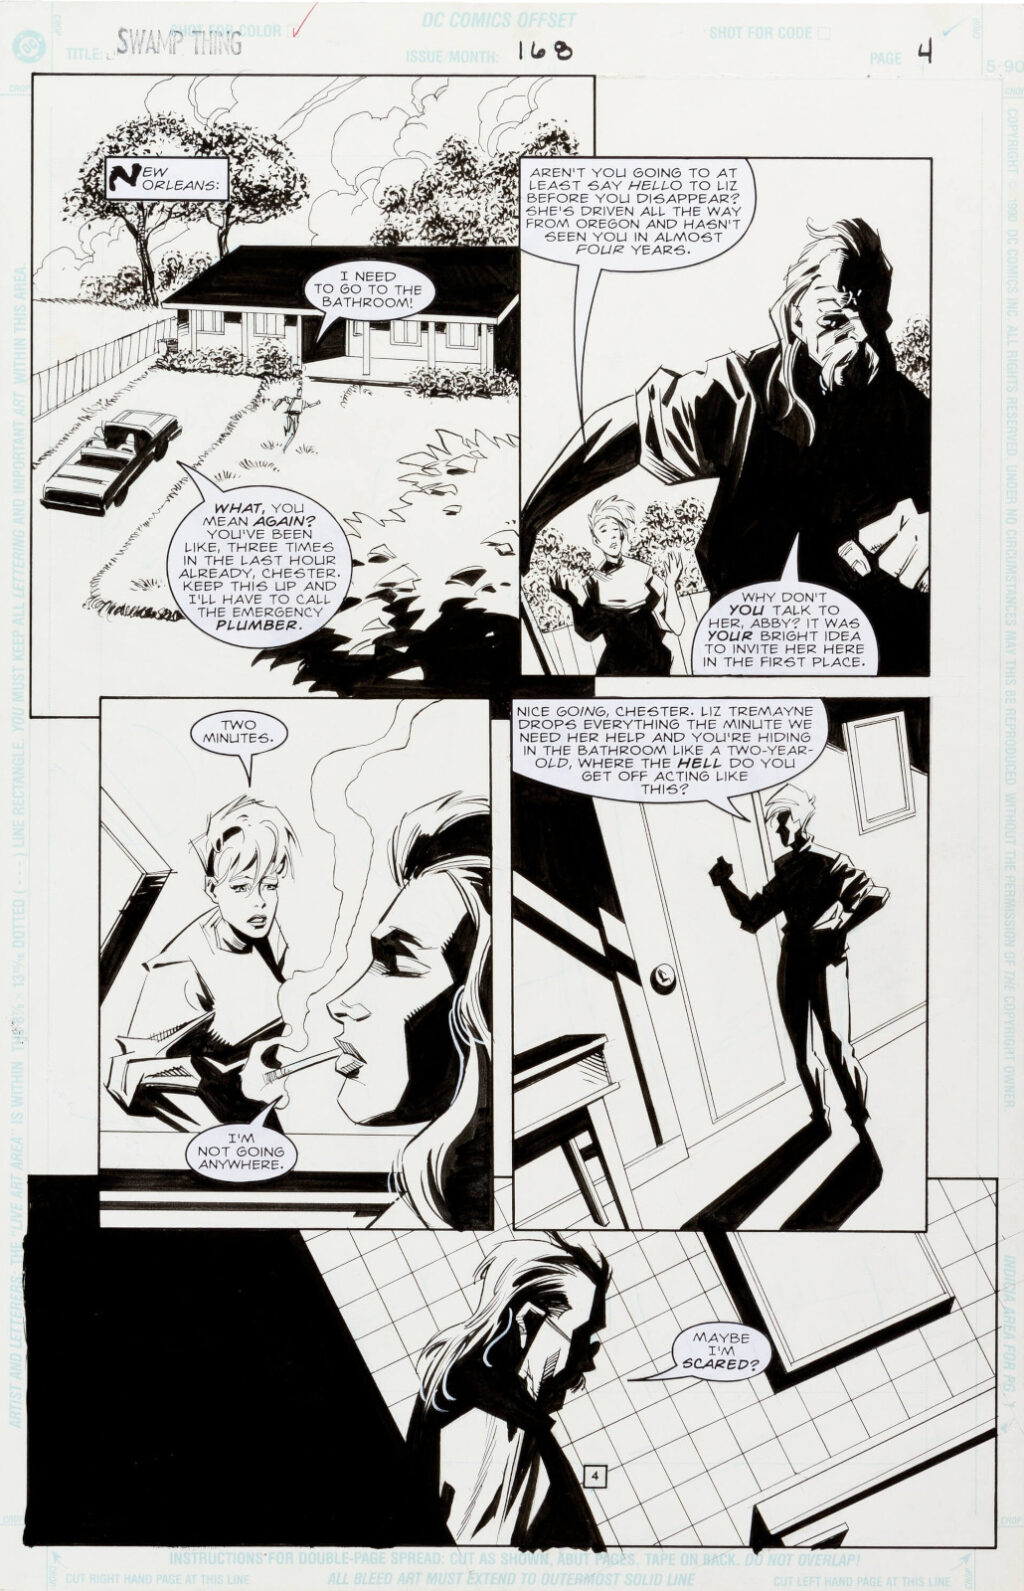 Swamp Thing issue 168 page 4 by Phil Hester and Kim DeMulder